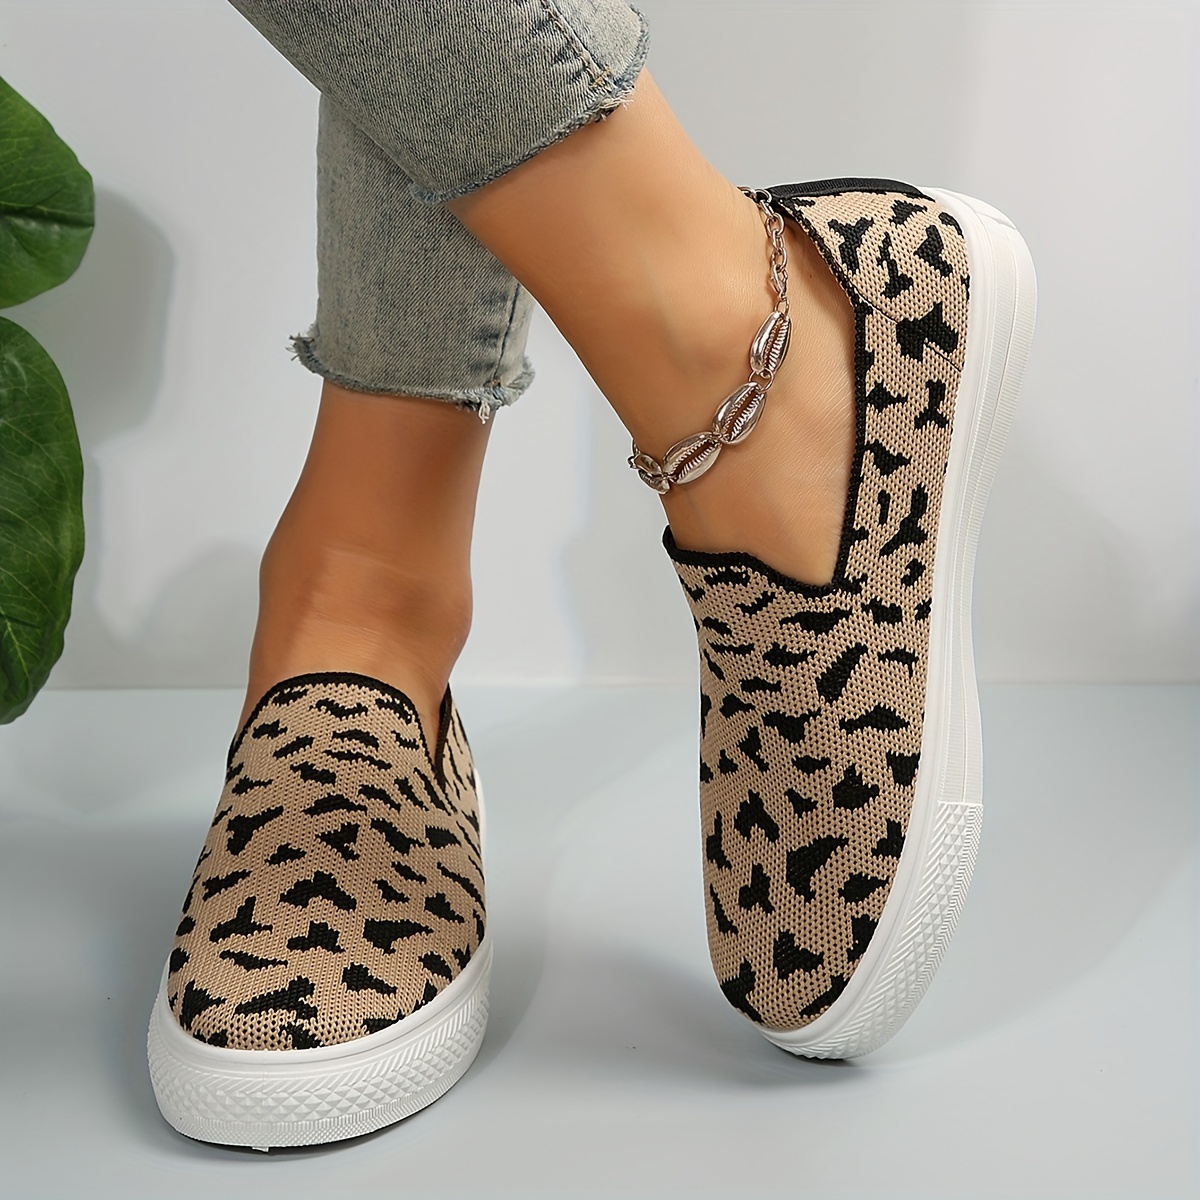 Women's Leopard & Zebra Printed Shoes, Slip On Low-top Round Toe Flat  Lightweight Shoes, Comfy Casual Daily Shoes